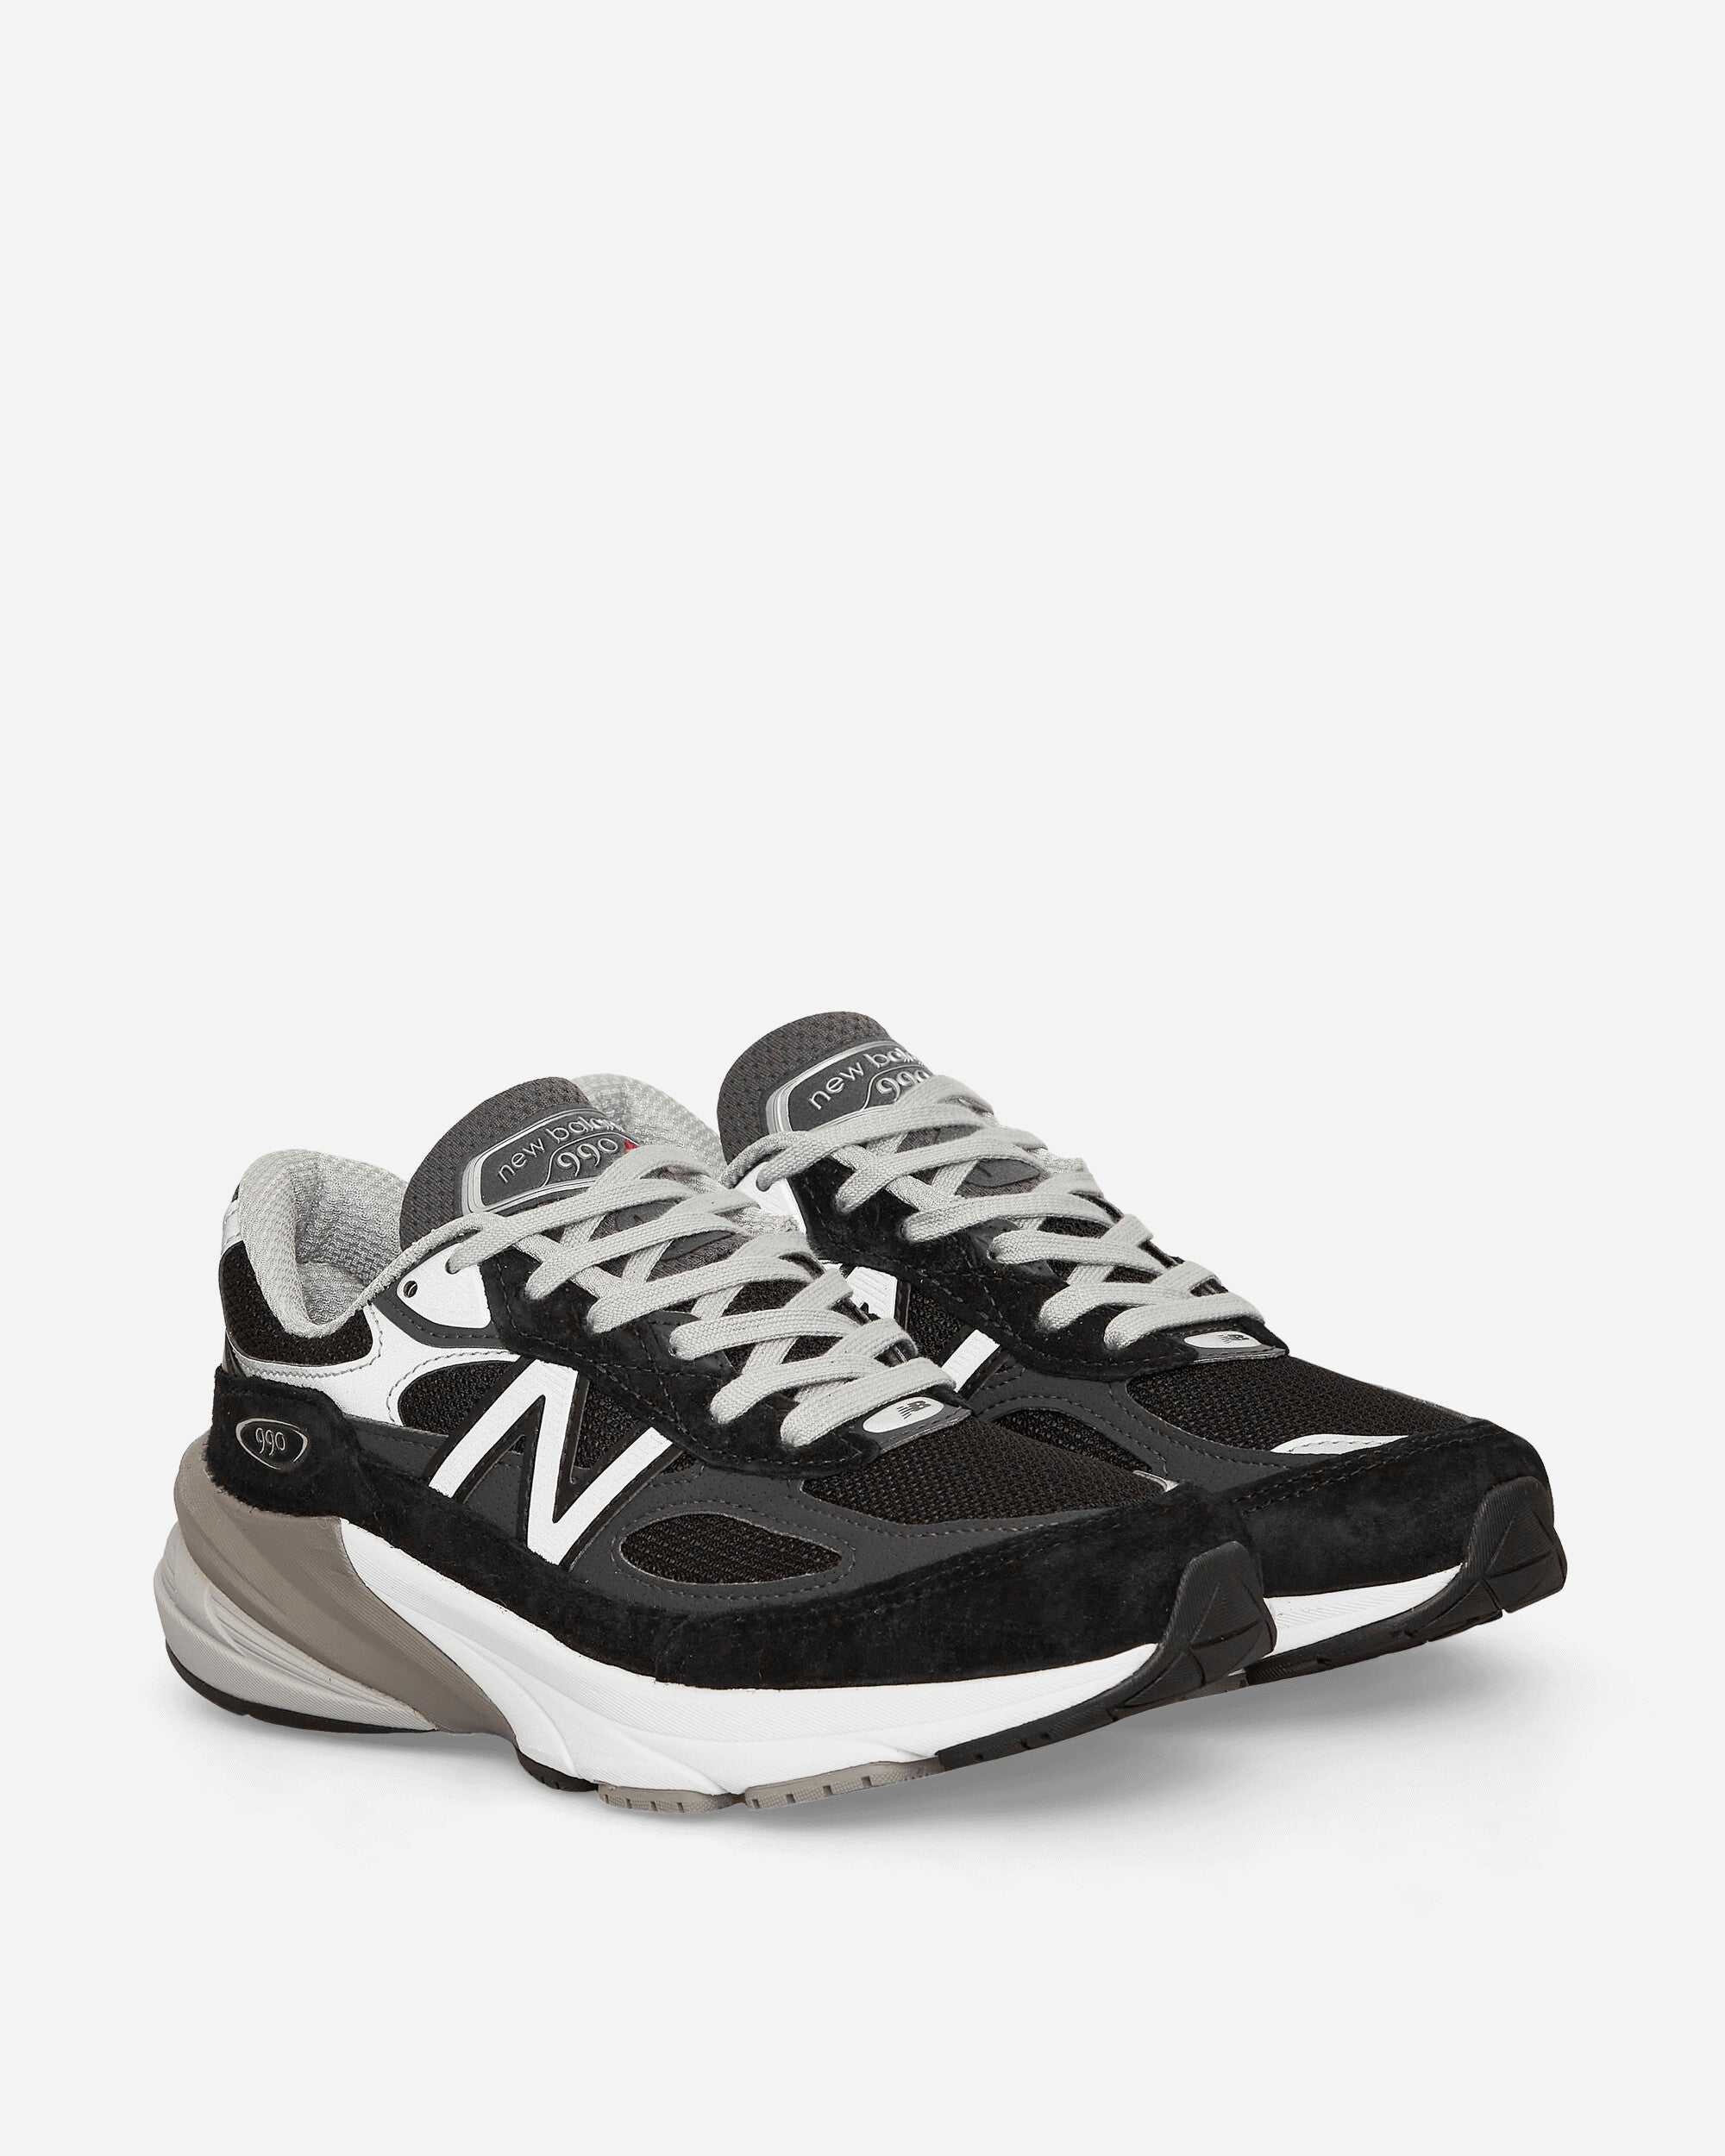 New Balance WMNS Made In USA 990v6 Sneakers Black - Slam Jam